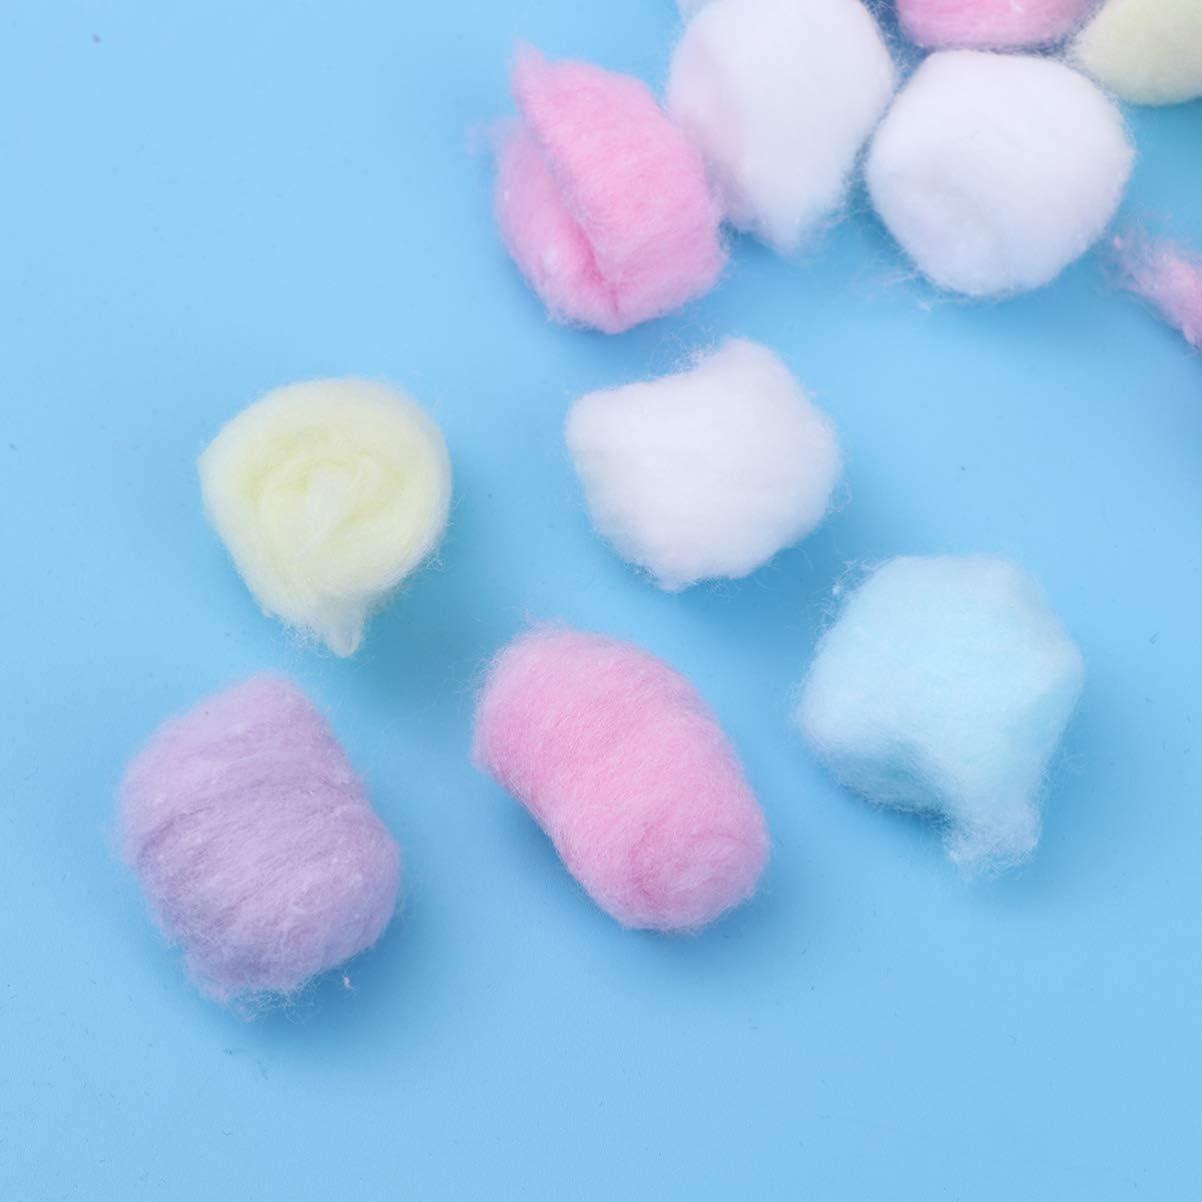 Lurrose Lurrose 1 Bag/500g Colored Cotton Balls Makeup Cotton Balls  Degreasing Cotton Ball for for Face Cleansing & Makeup Removal Beauty Salon  Home Use